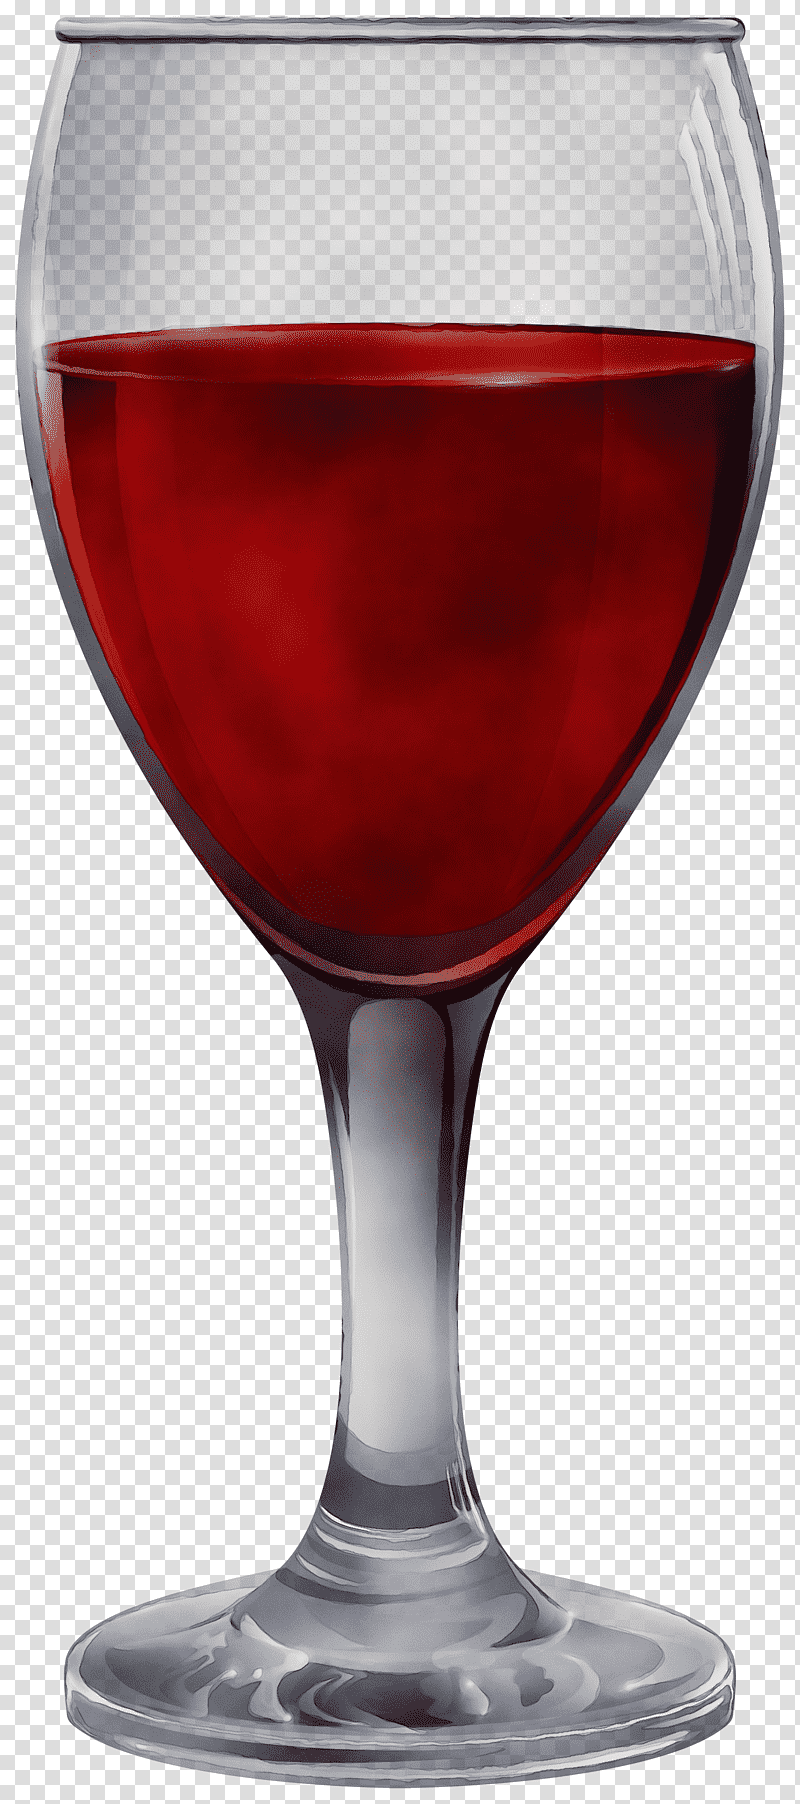 Wine Glass, Watercolor, Paint, Wet Ink, Red Wine, Kir, Beer Glass transparent background PNG clipart